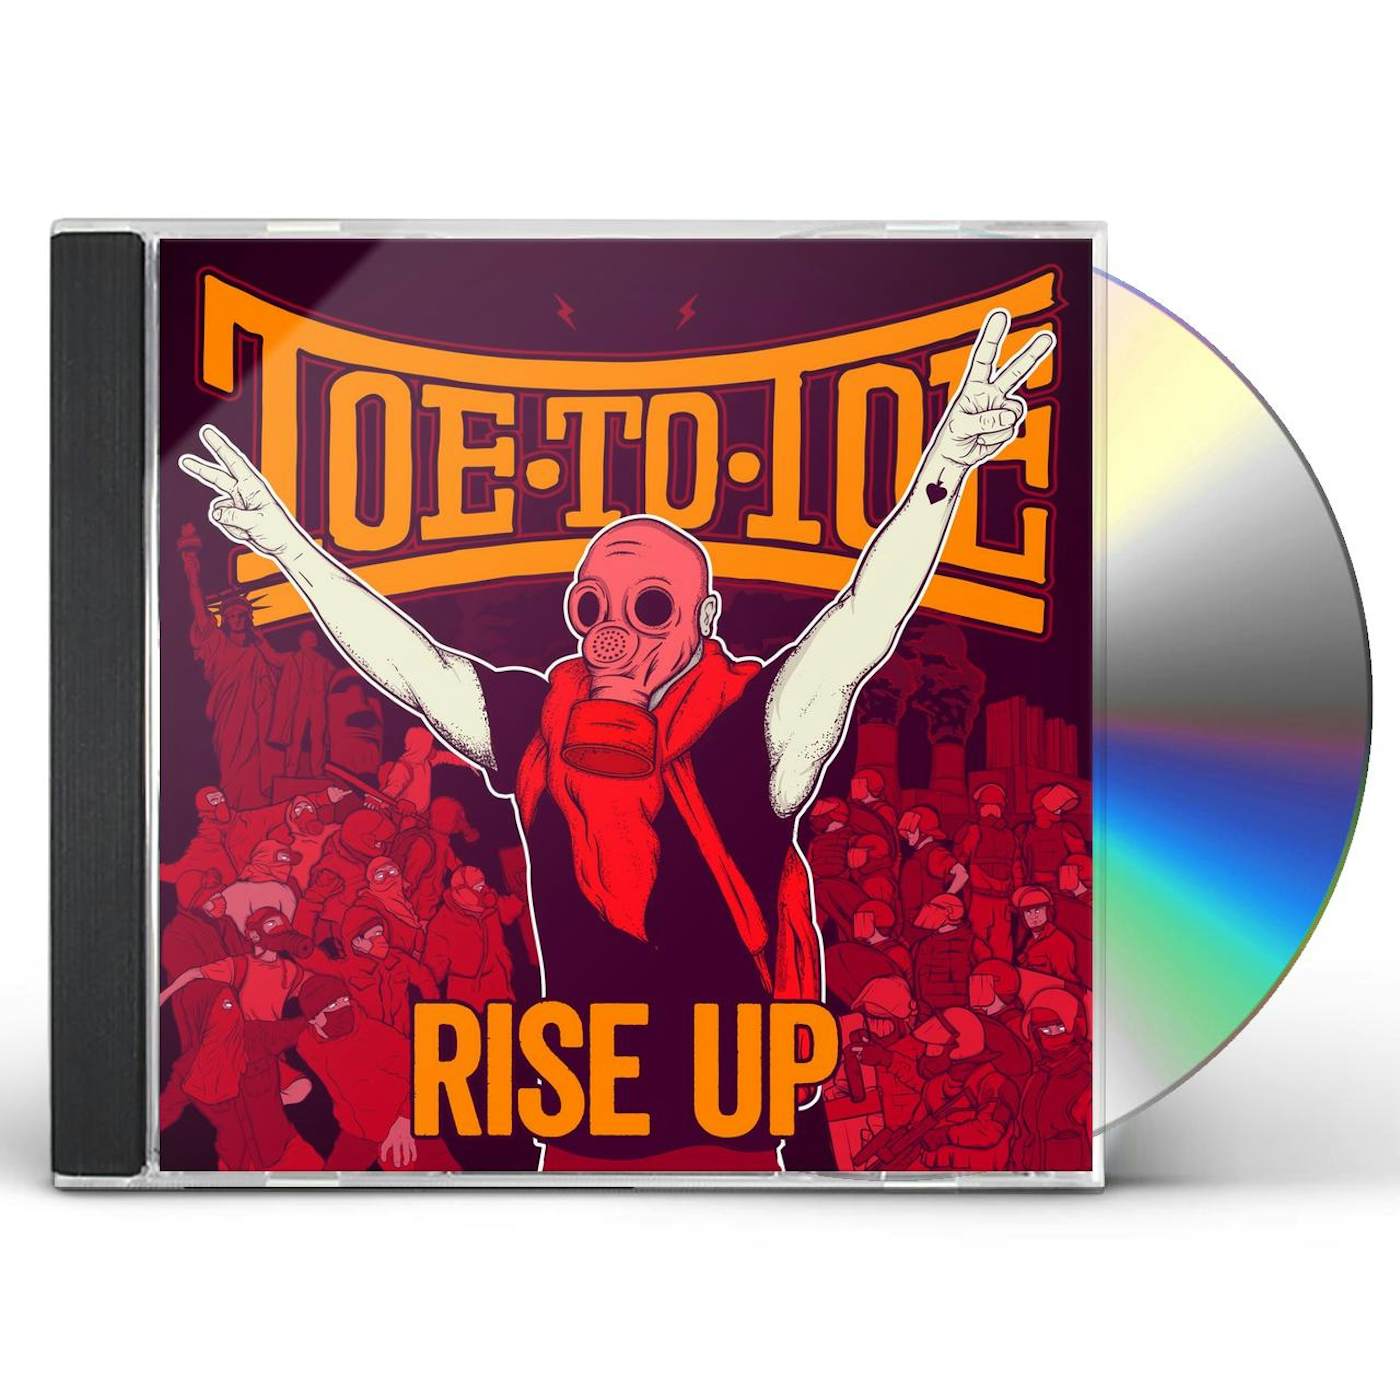 Toe To Toe RISE UP CD